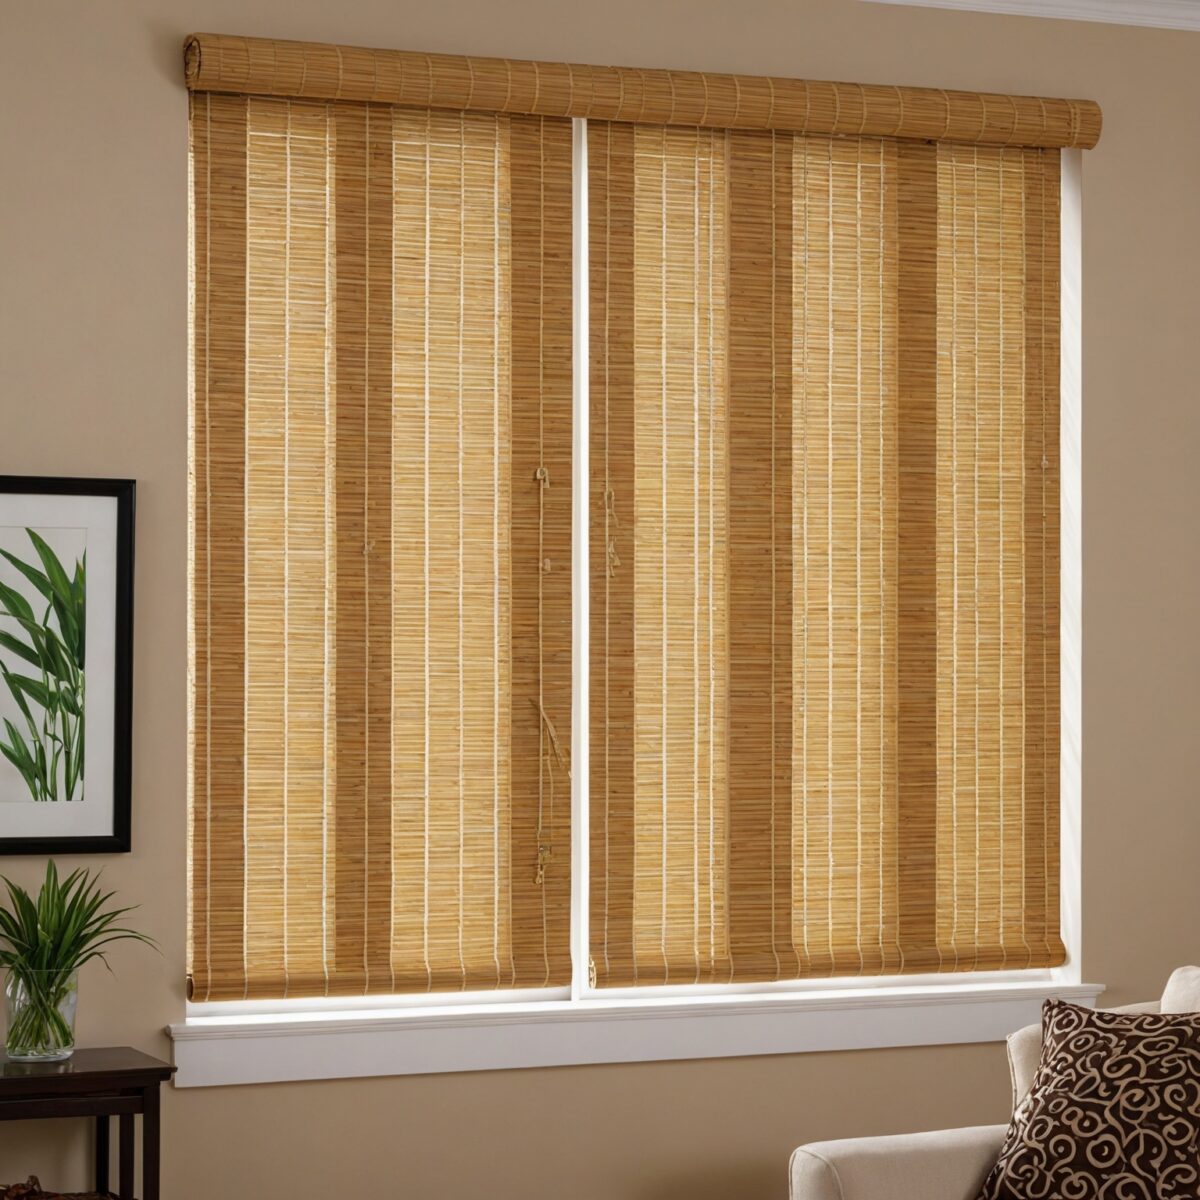 Get our Best Quality Bamboo Blinds in Dubai